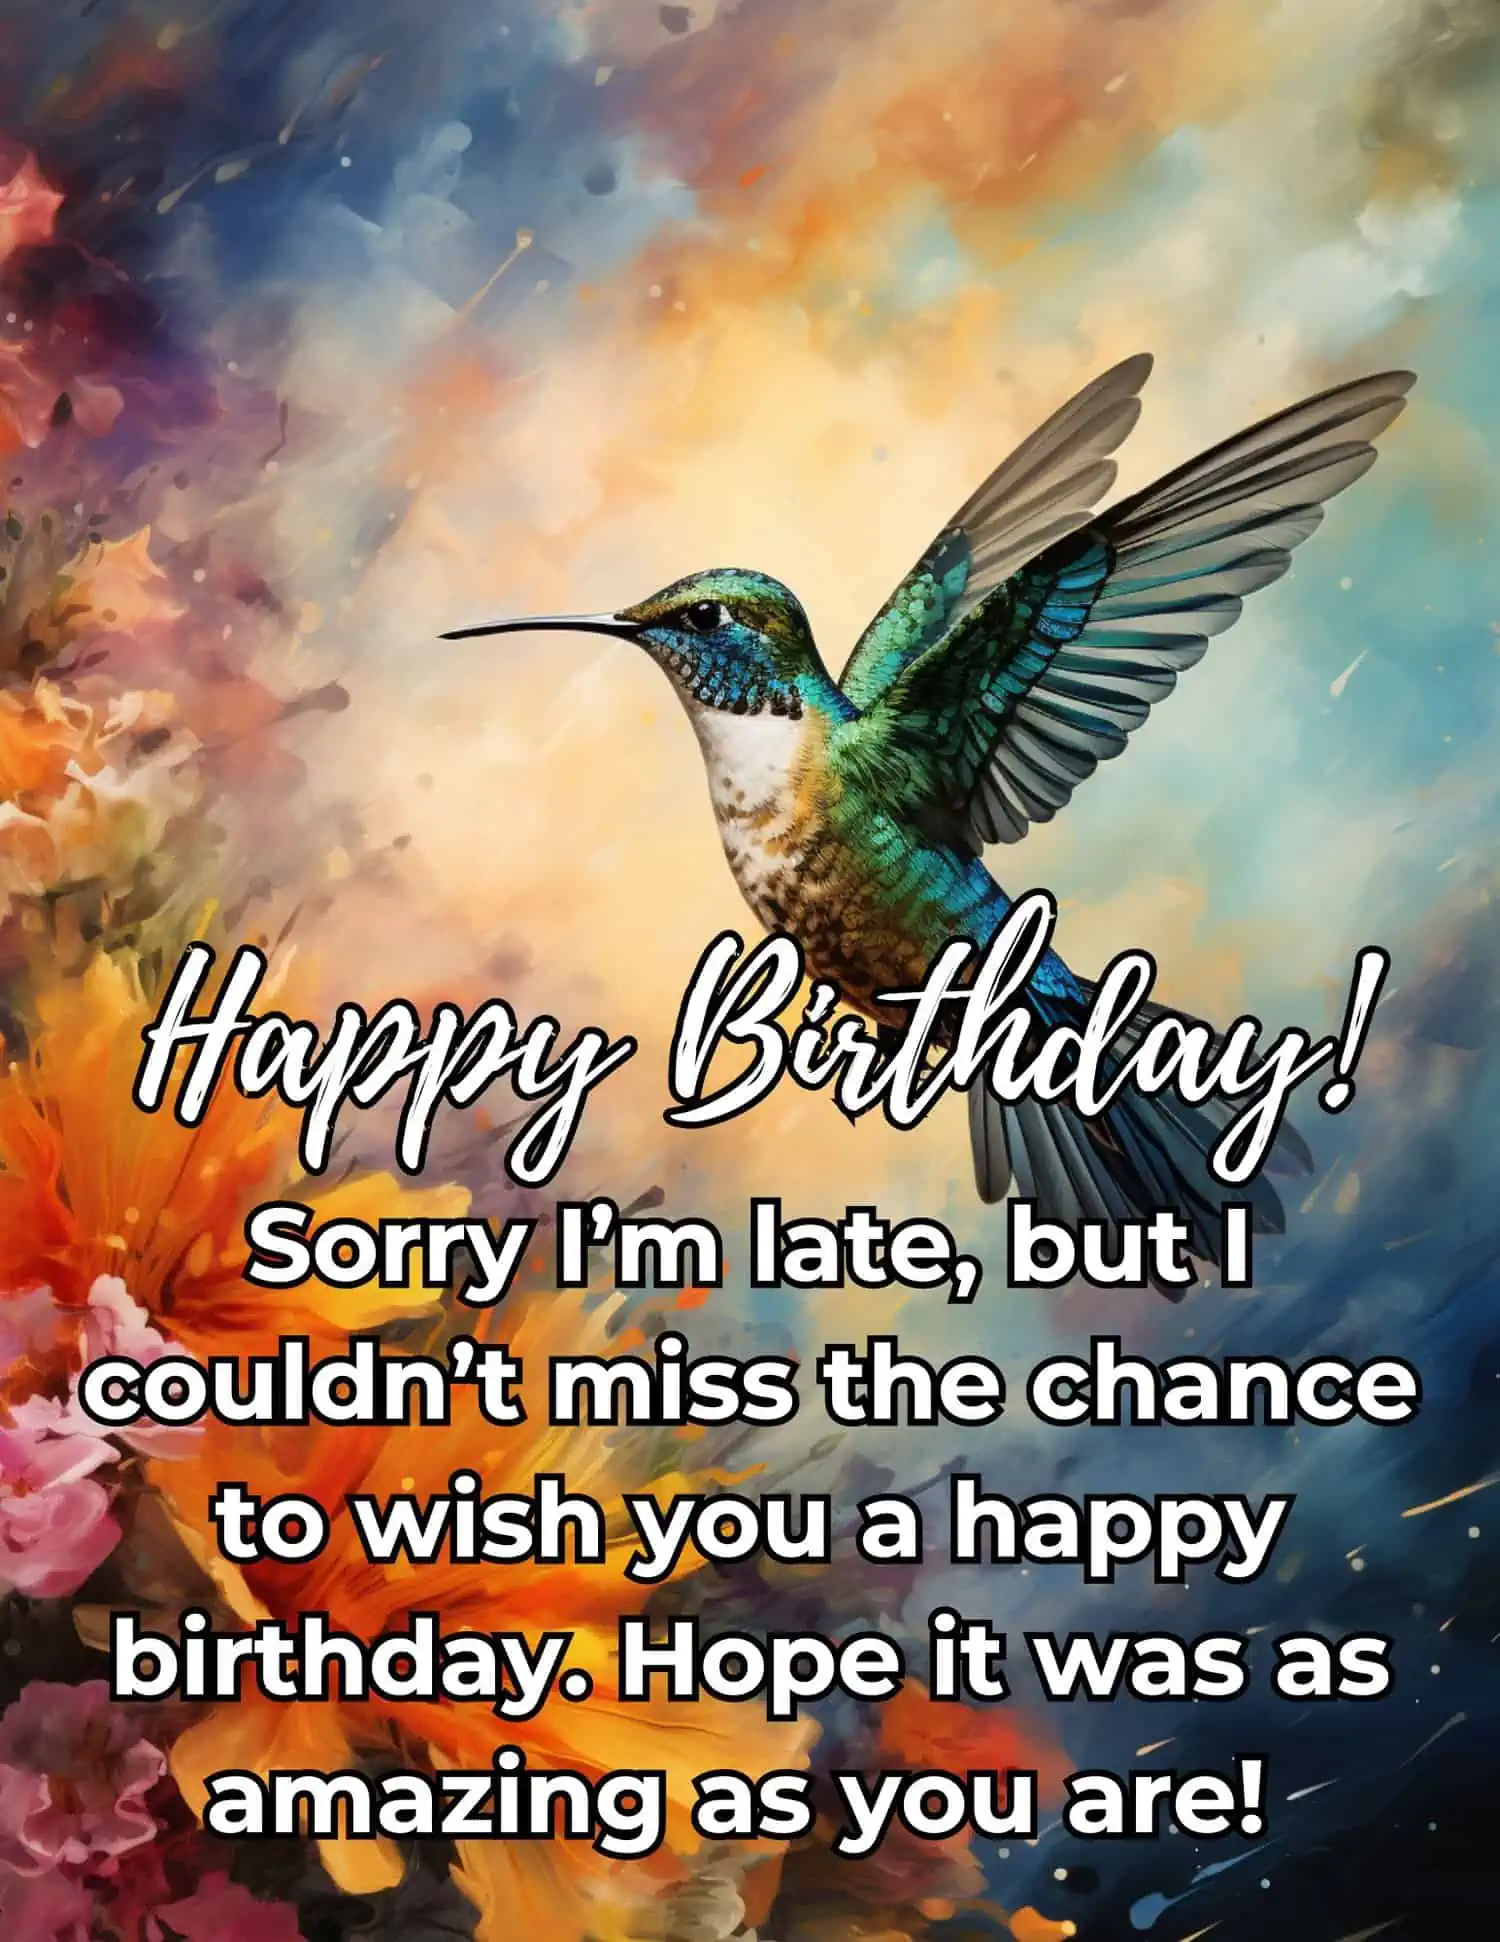 A thoughtful collection of belated birthday wishes, perfect for conveying sincere apologies and heartfelt sentiments to an ex-girlfriend, even after her special day has passed.